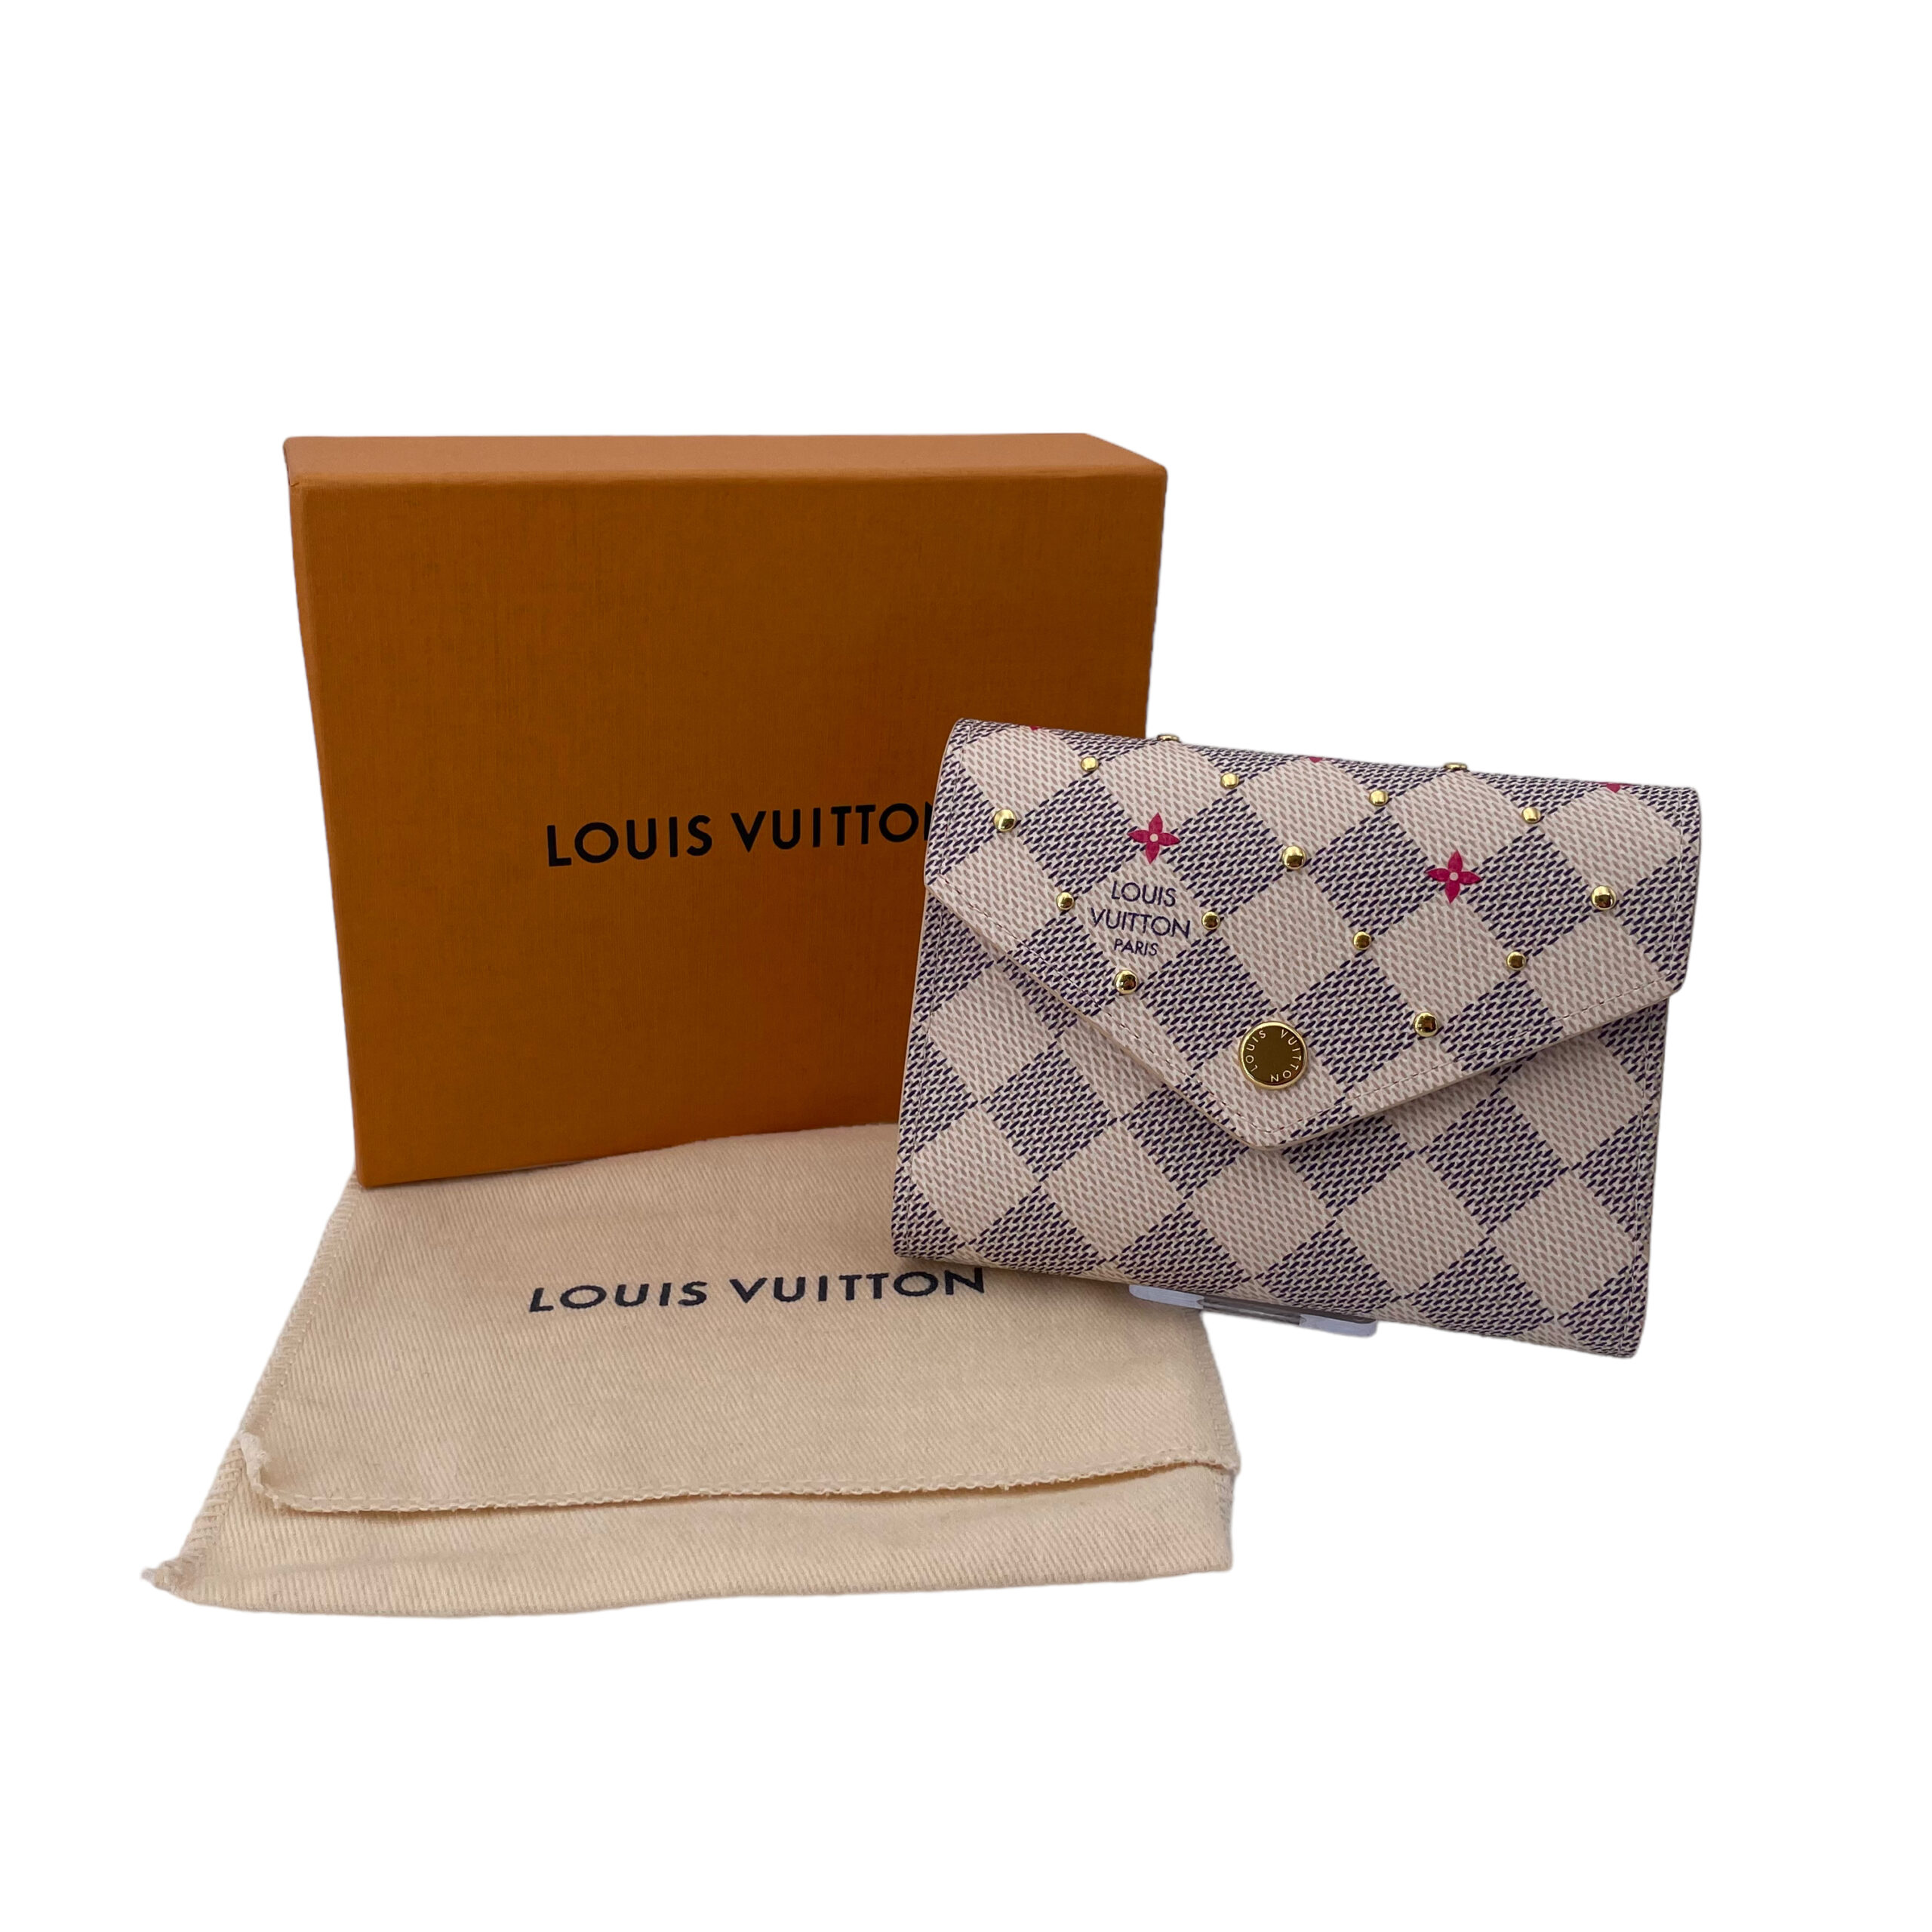 Louis Vuitton SPECIAL Limited STUDS Collection CARD Holder